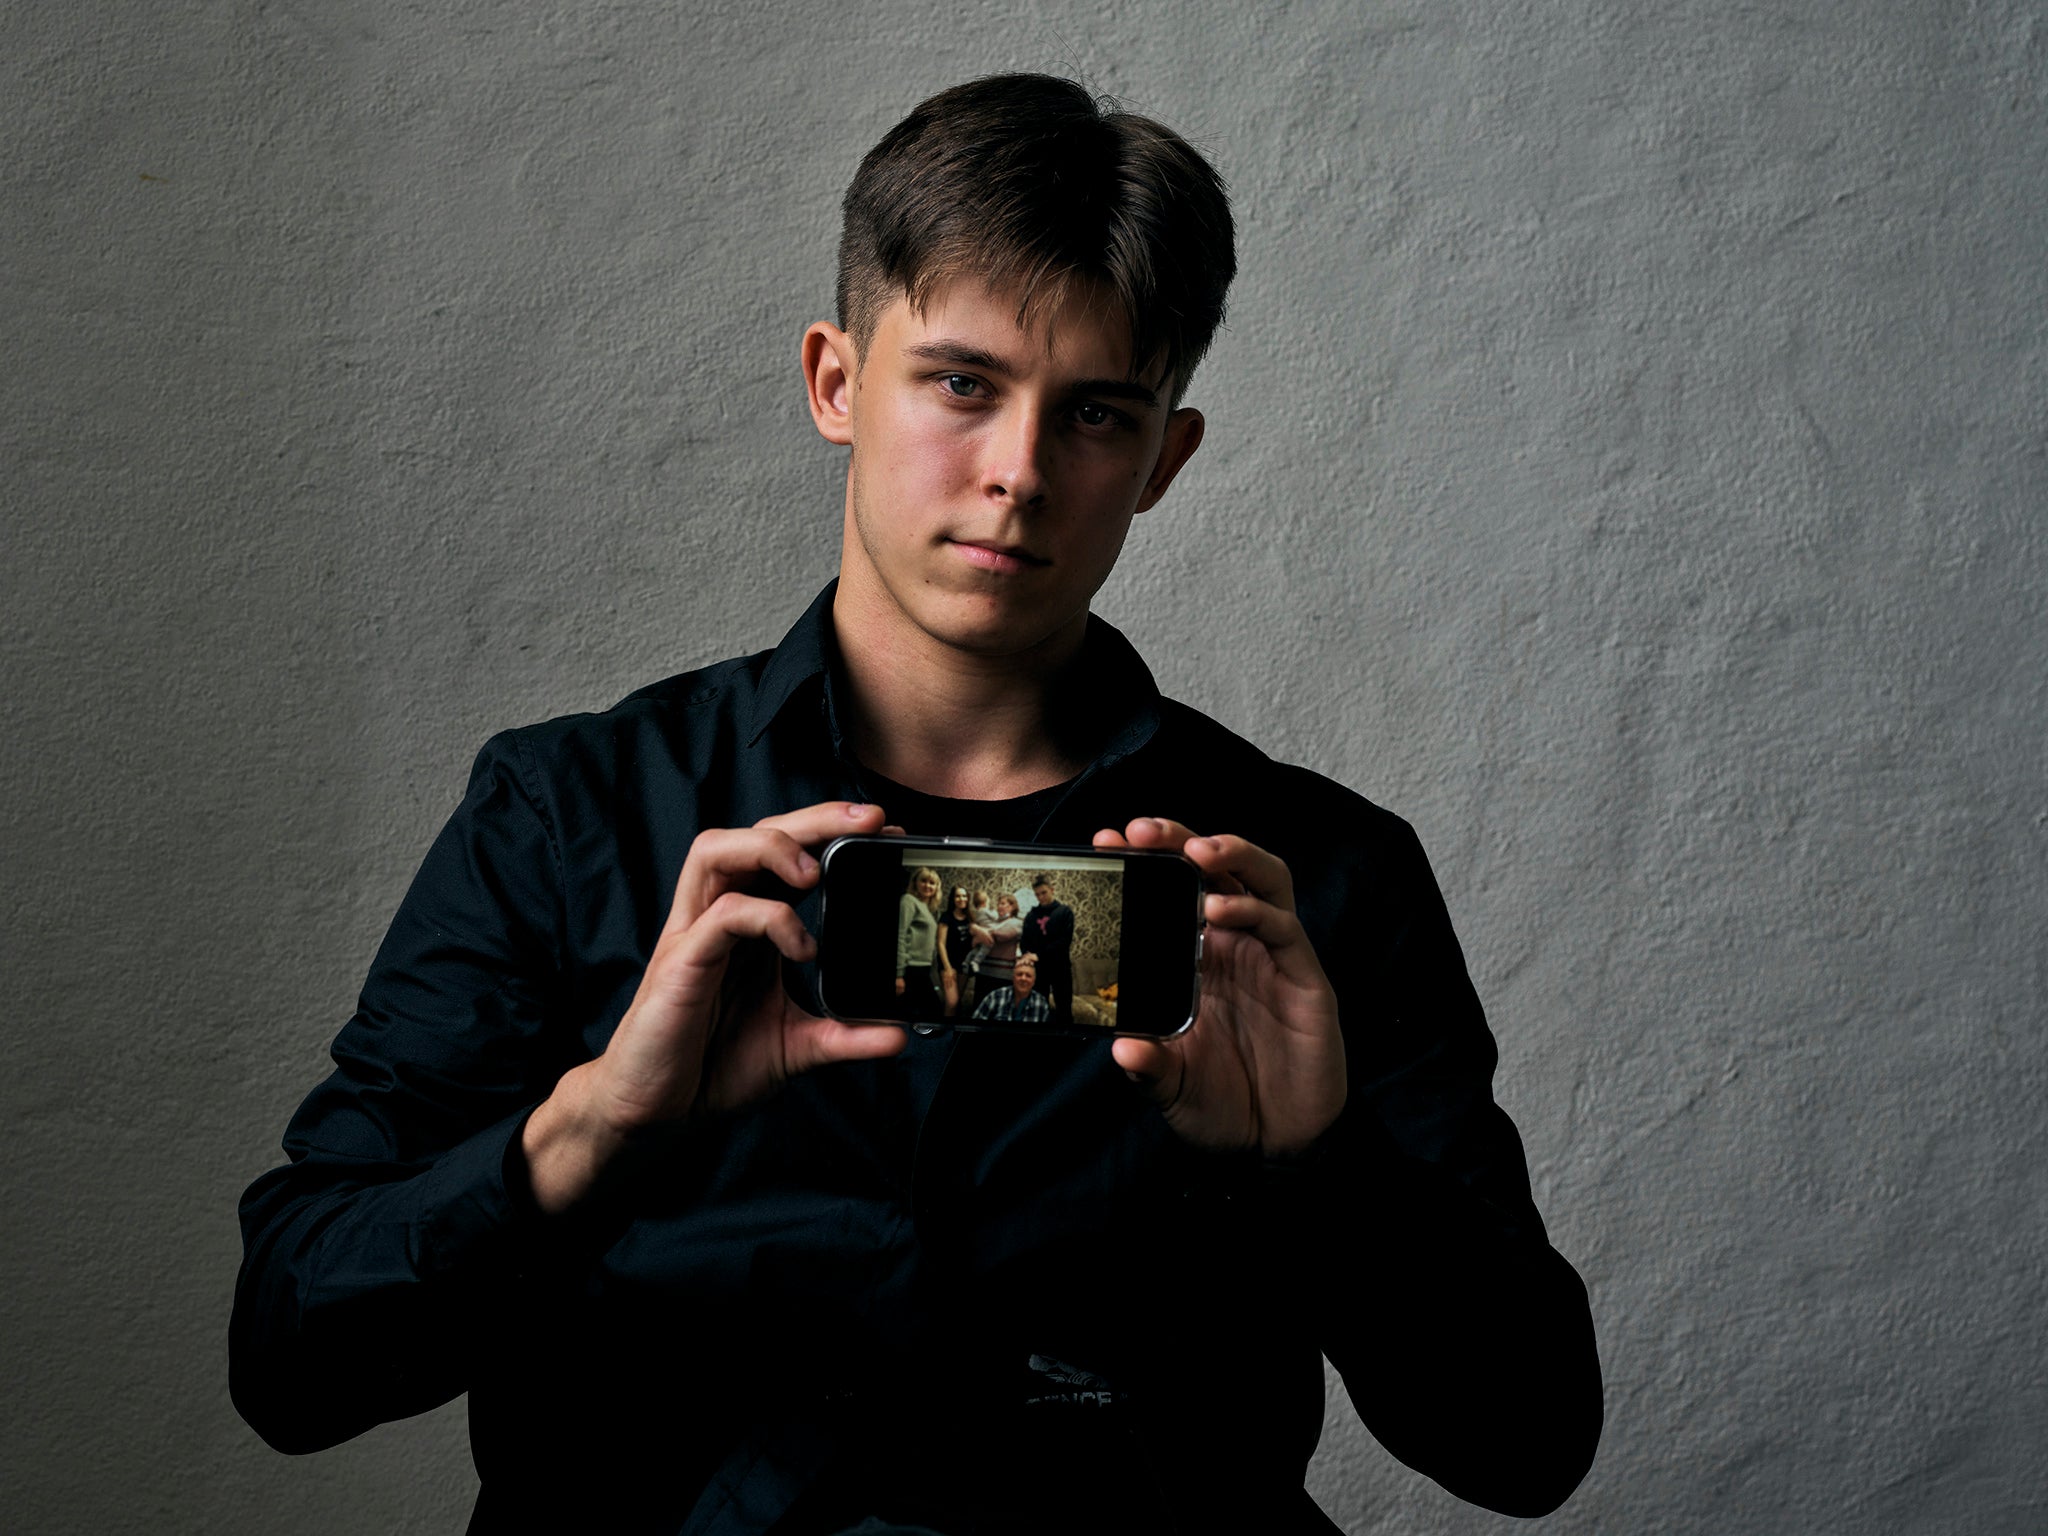 Igor, 18, from Mariupol in Ukraine, shows a photograph on his phone of his family, who are still stuck in the Russian-controlled city